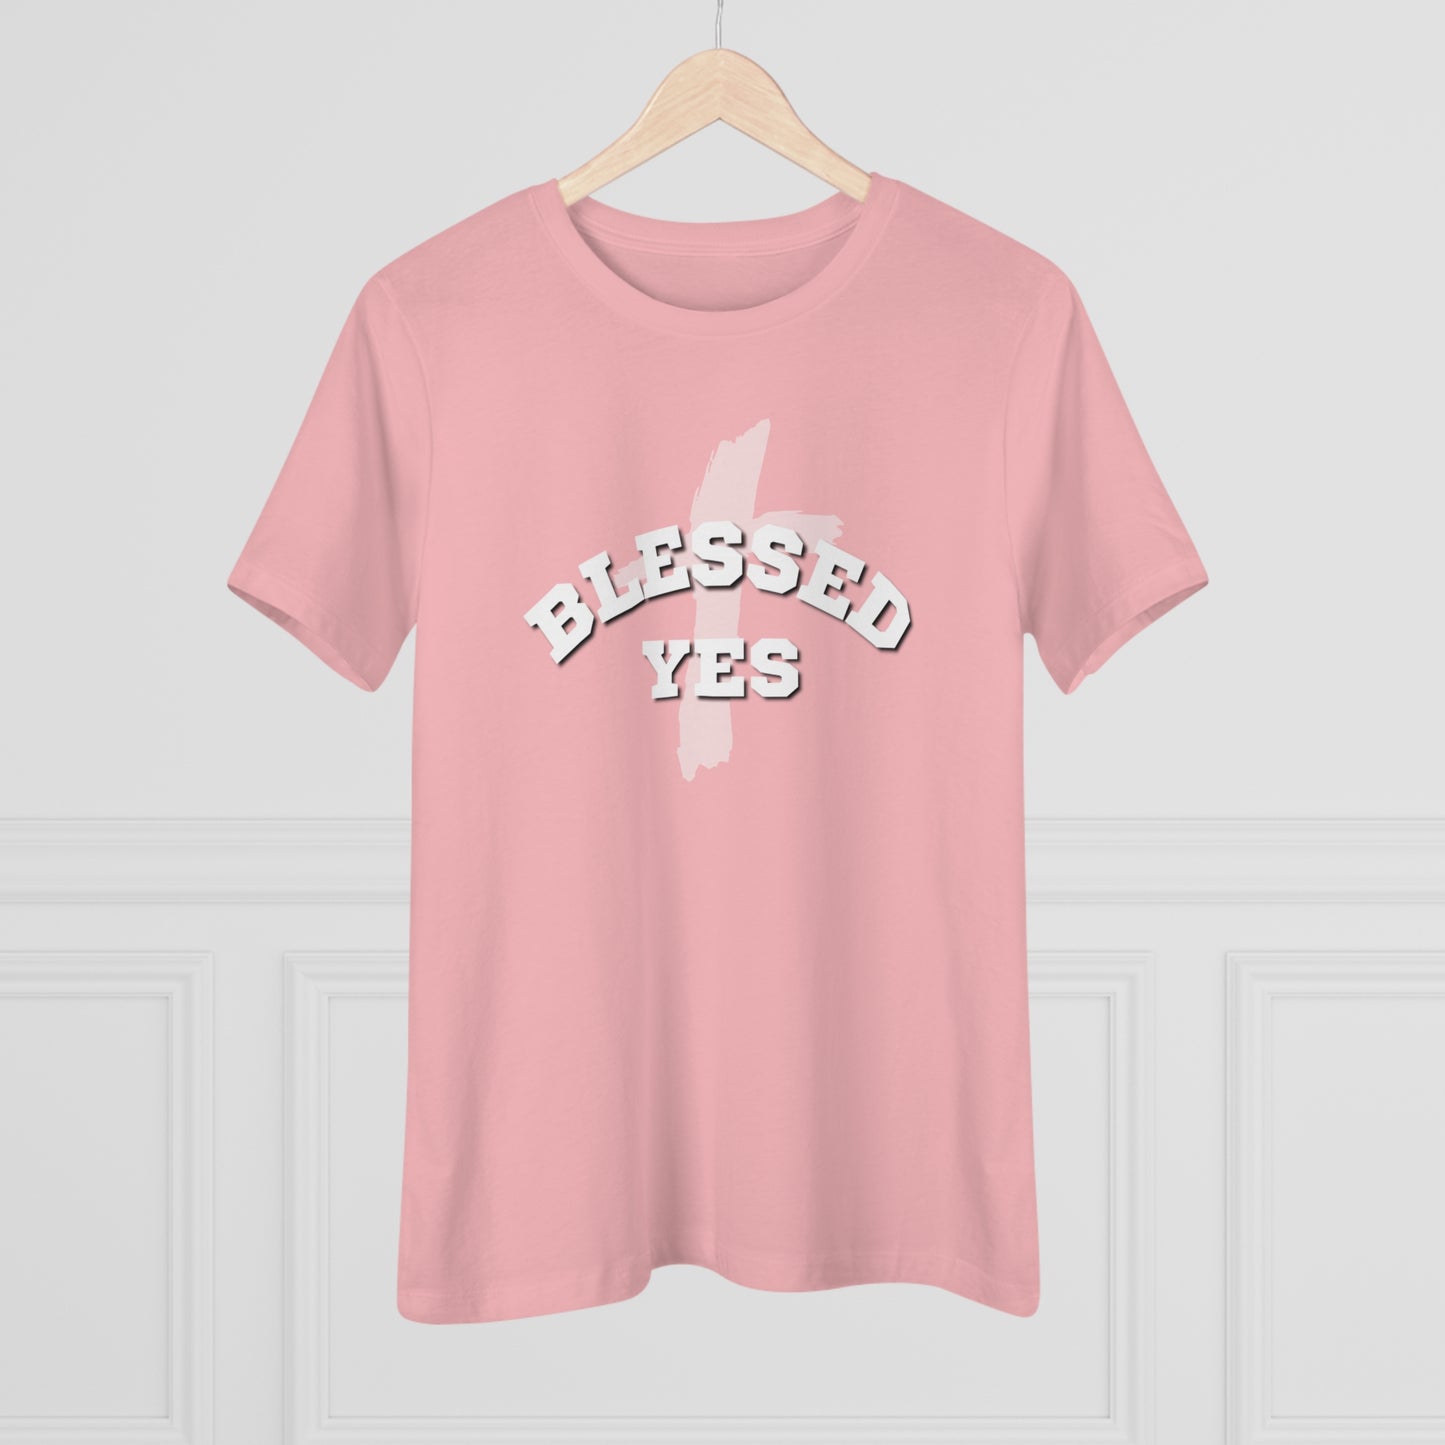 BlessedYes Cross Relaxed Fit Premium Tshirt - BlessedYes Boutique